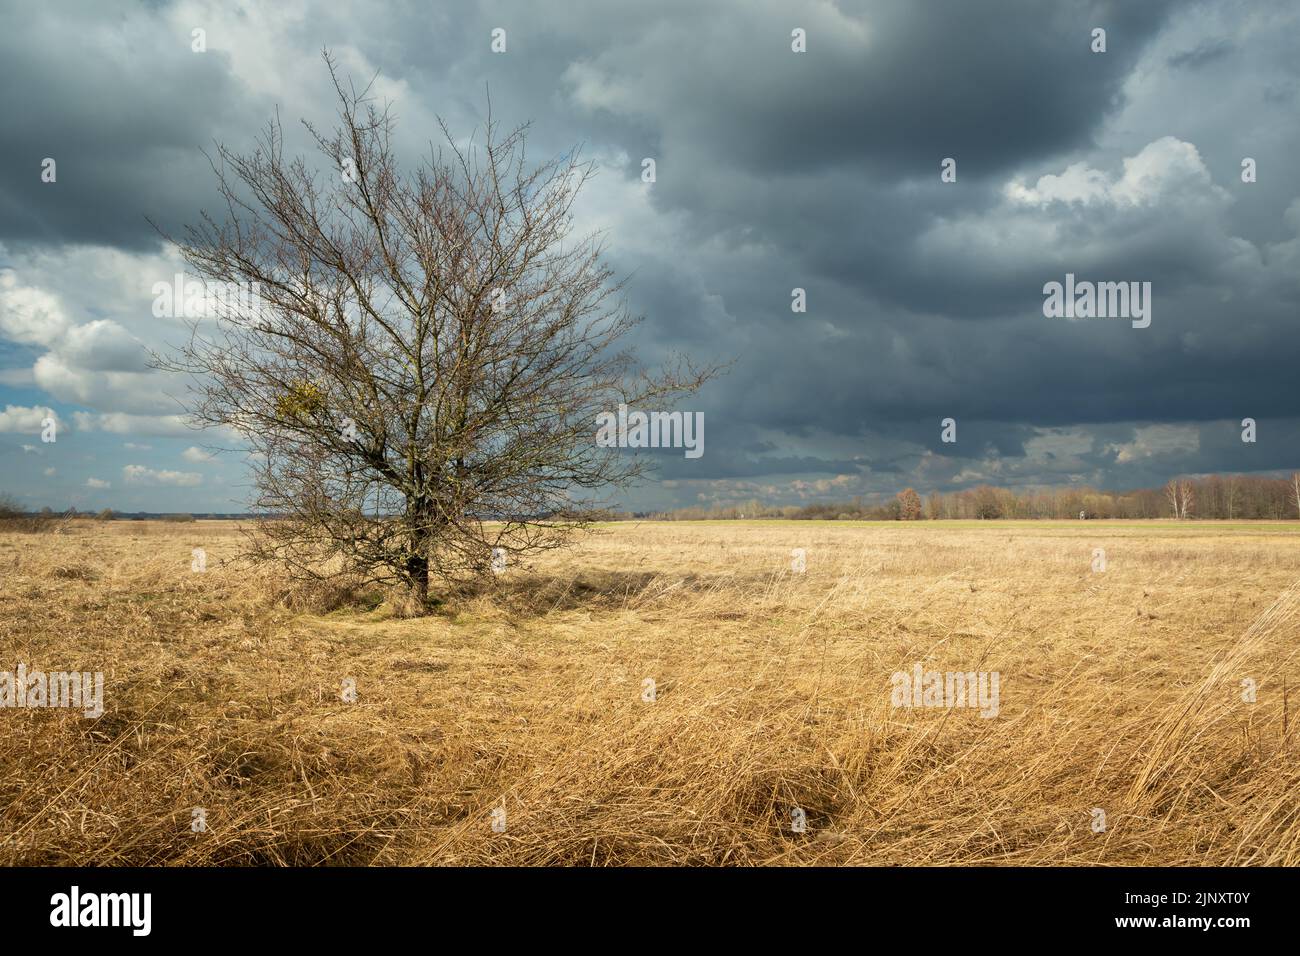 Single tree without leaves growing in dry meadow and stormy sky, Czulczyce, Poland Stock Photo